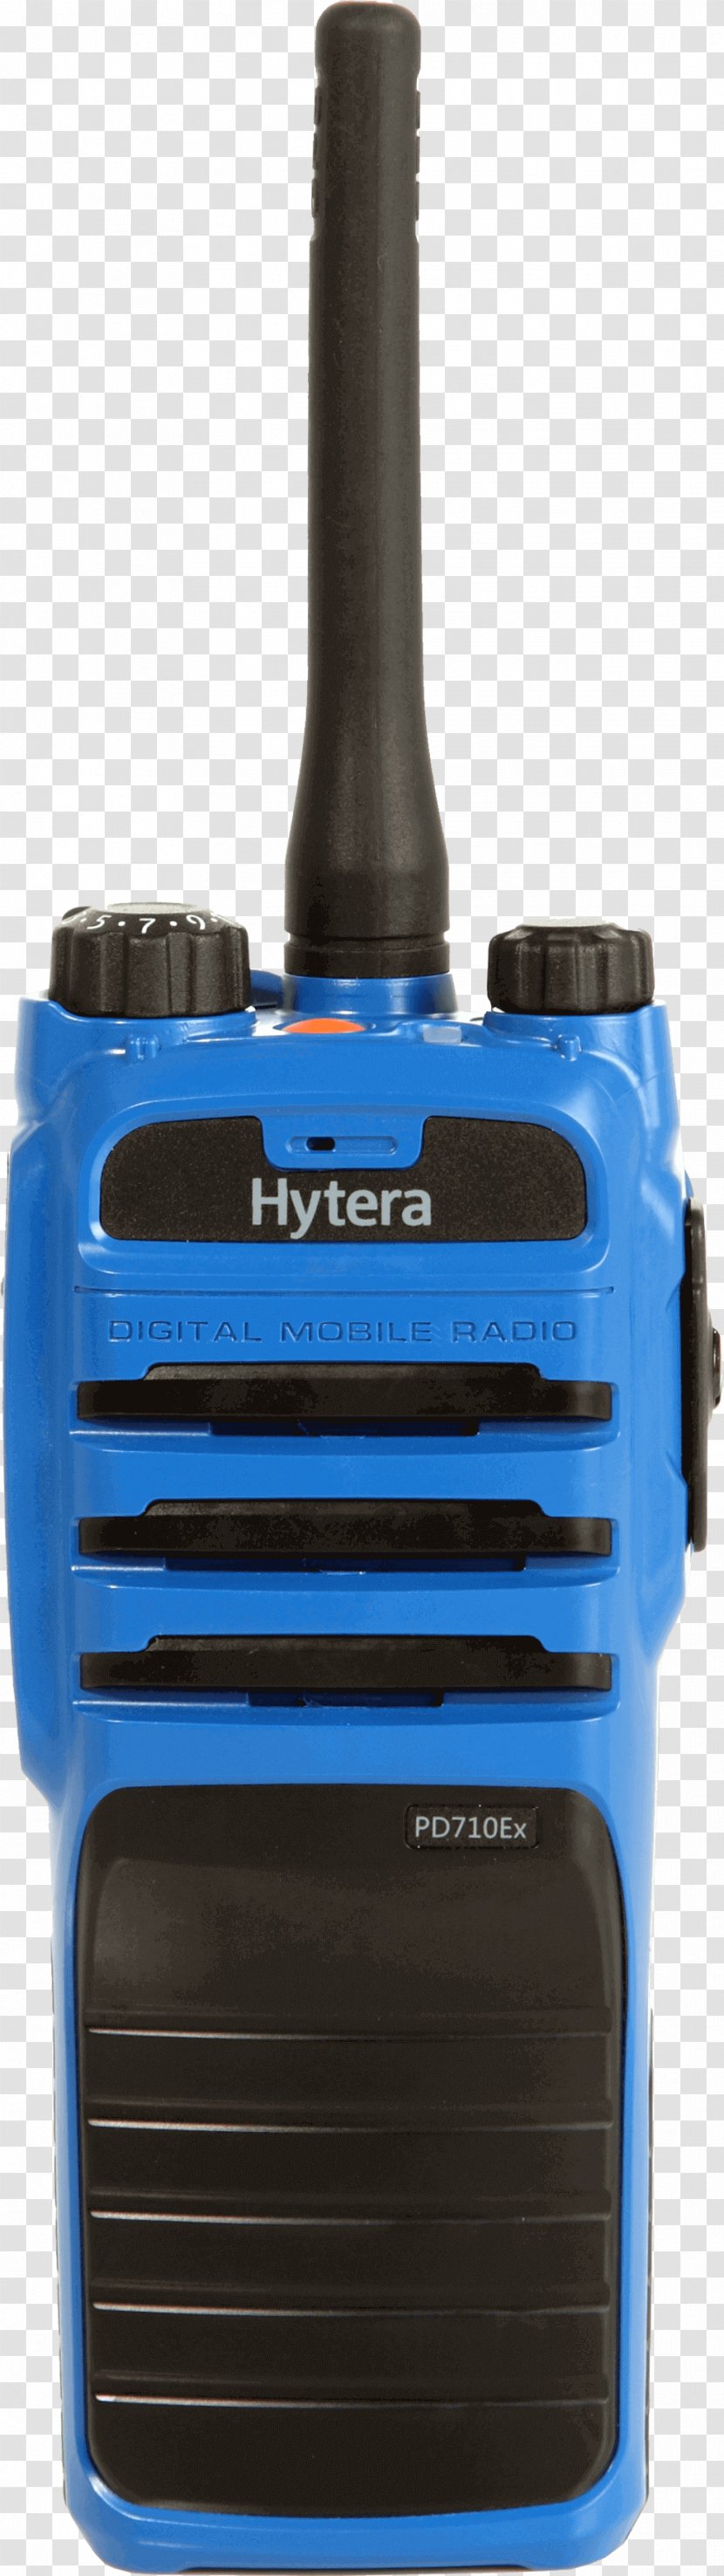 Walkie-talkie ATEX Directive Hytera Two-way Radio - Very High Frequency Transparent PNG